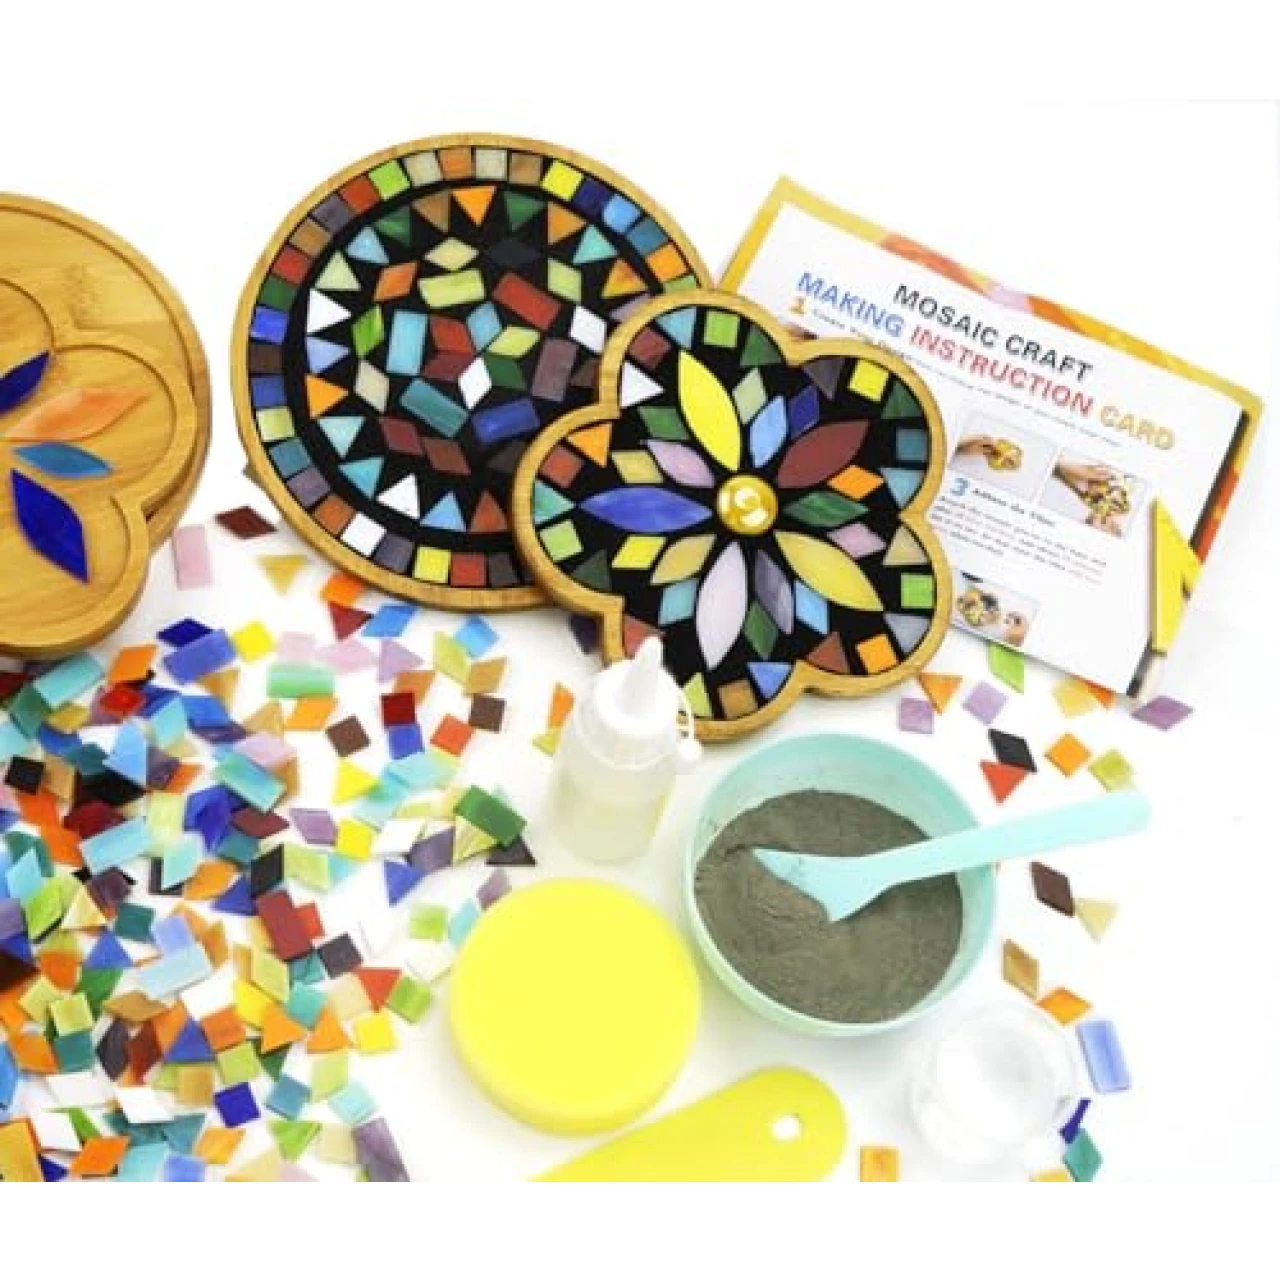 Lanyani 2 Sets of DIY Mosaic Craft Kits Mosaic Tiles Coaster Kit Make Your Own Mosaic Project Handmade Craft Set with Stained Glass Mosaic Tile Pieces for Decoration and Gift